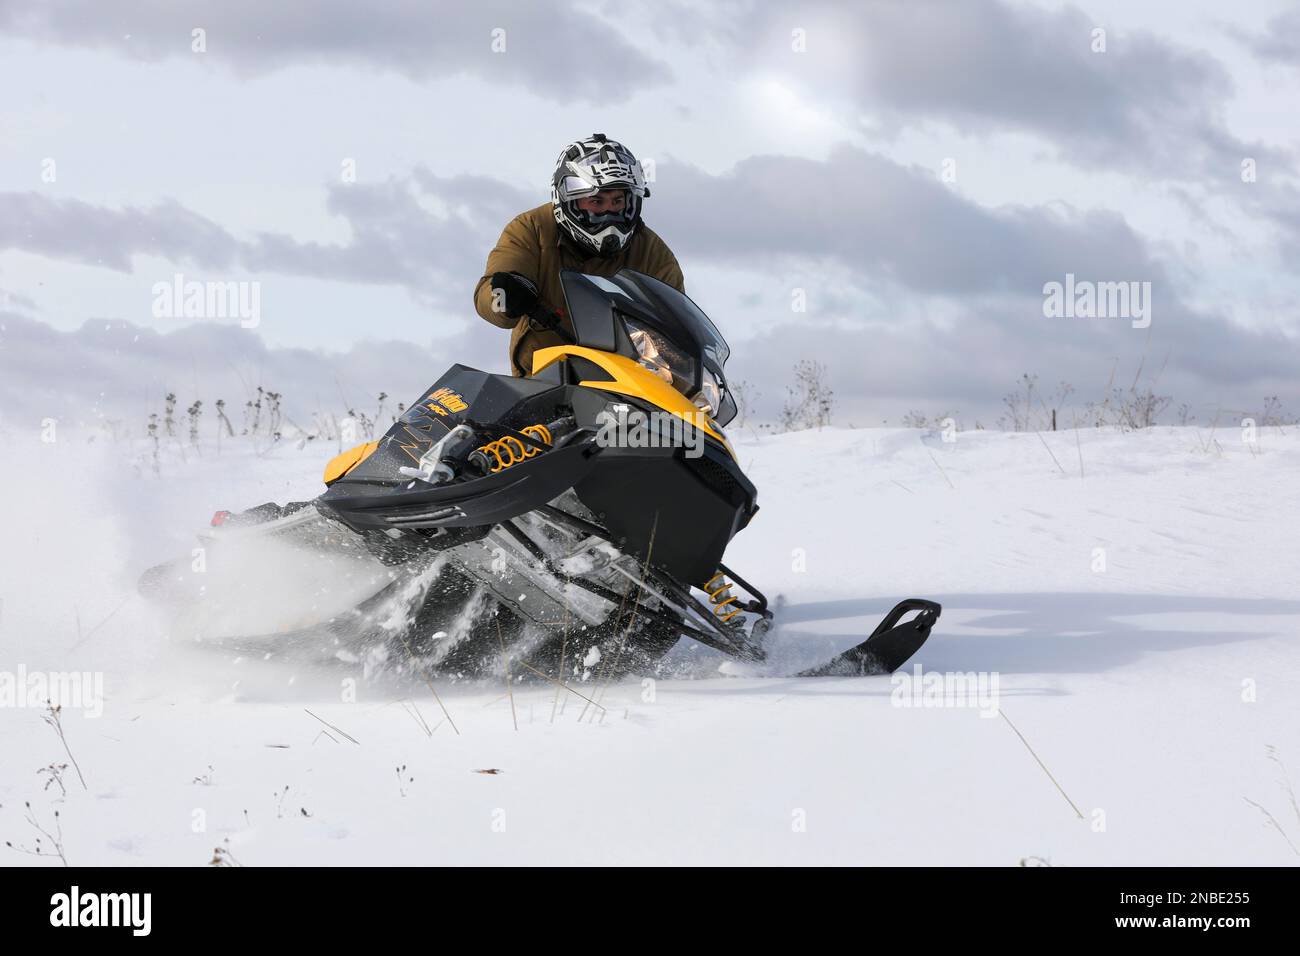 LITTLE FALLS, Minn. (Feb. 9, 2023) –A U.S. Navy Explosive Ordnance Disposal (EOD) Technician, assigned to EOD Mobile Unit Two, drives a snowmobile during Arctic mobility training in Little Falls, Minnesota, Feb. 9, 2023 during Snow Crab Exercise 23-1, an exercise designed to test and evaluate U.S. Navy Explosive Ordnance Disposal’s (EOD) and Navy Diver’s capabilities and equipment in a simulated Arctic environment and improve combat effectiveness. Navy EOD and Navy Divers are part of the Navy Expeditionary Combat Force (NECF), enabling the U.S. Navy Fleet by clearing and protecting the battles Stock Photo